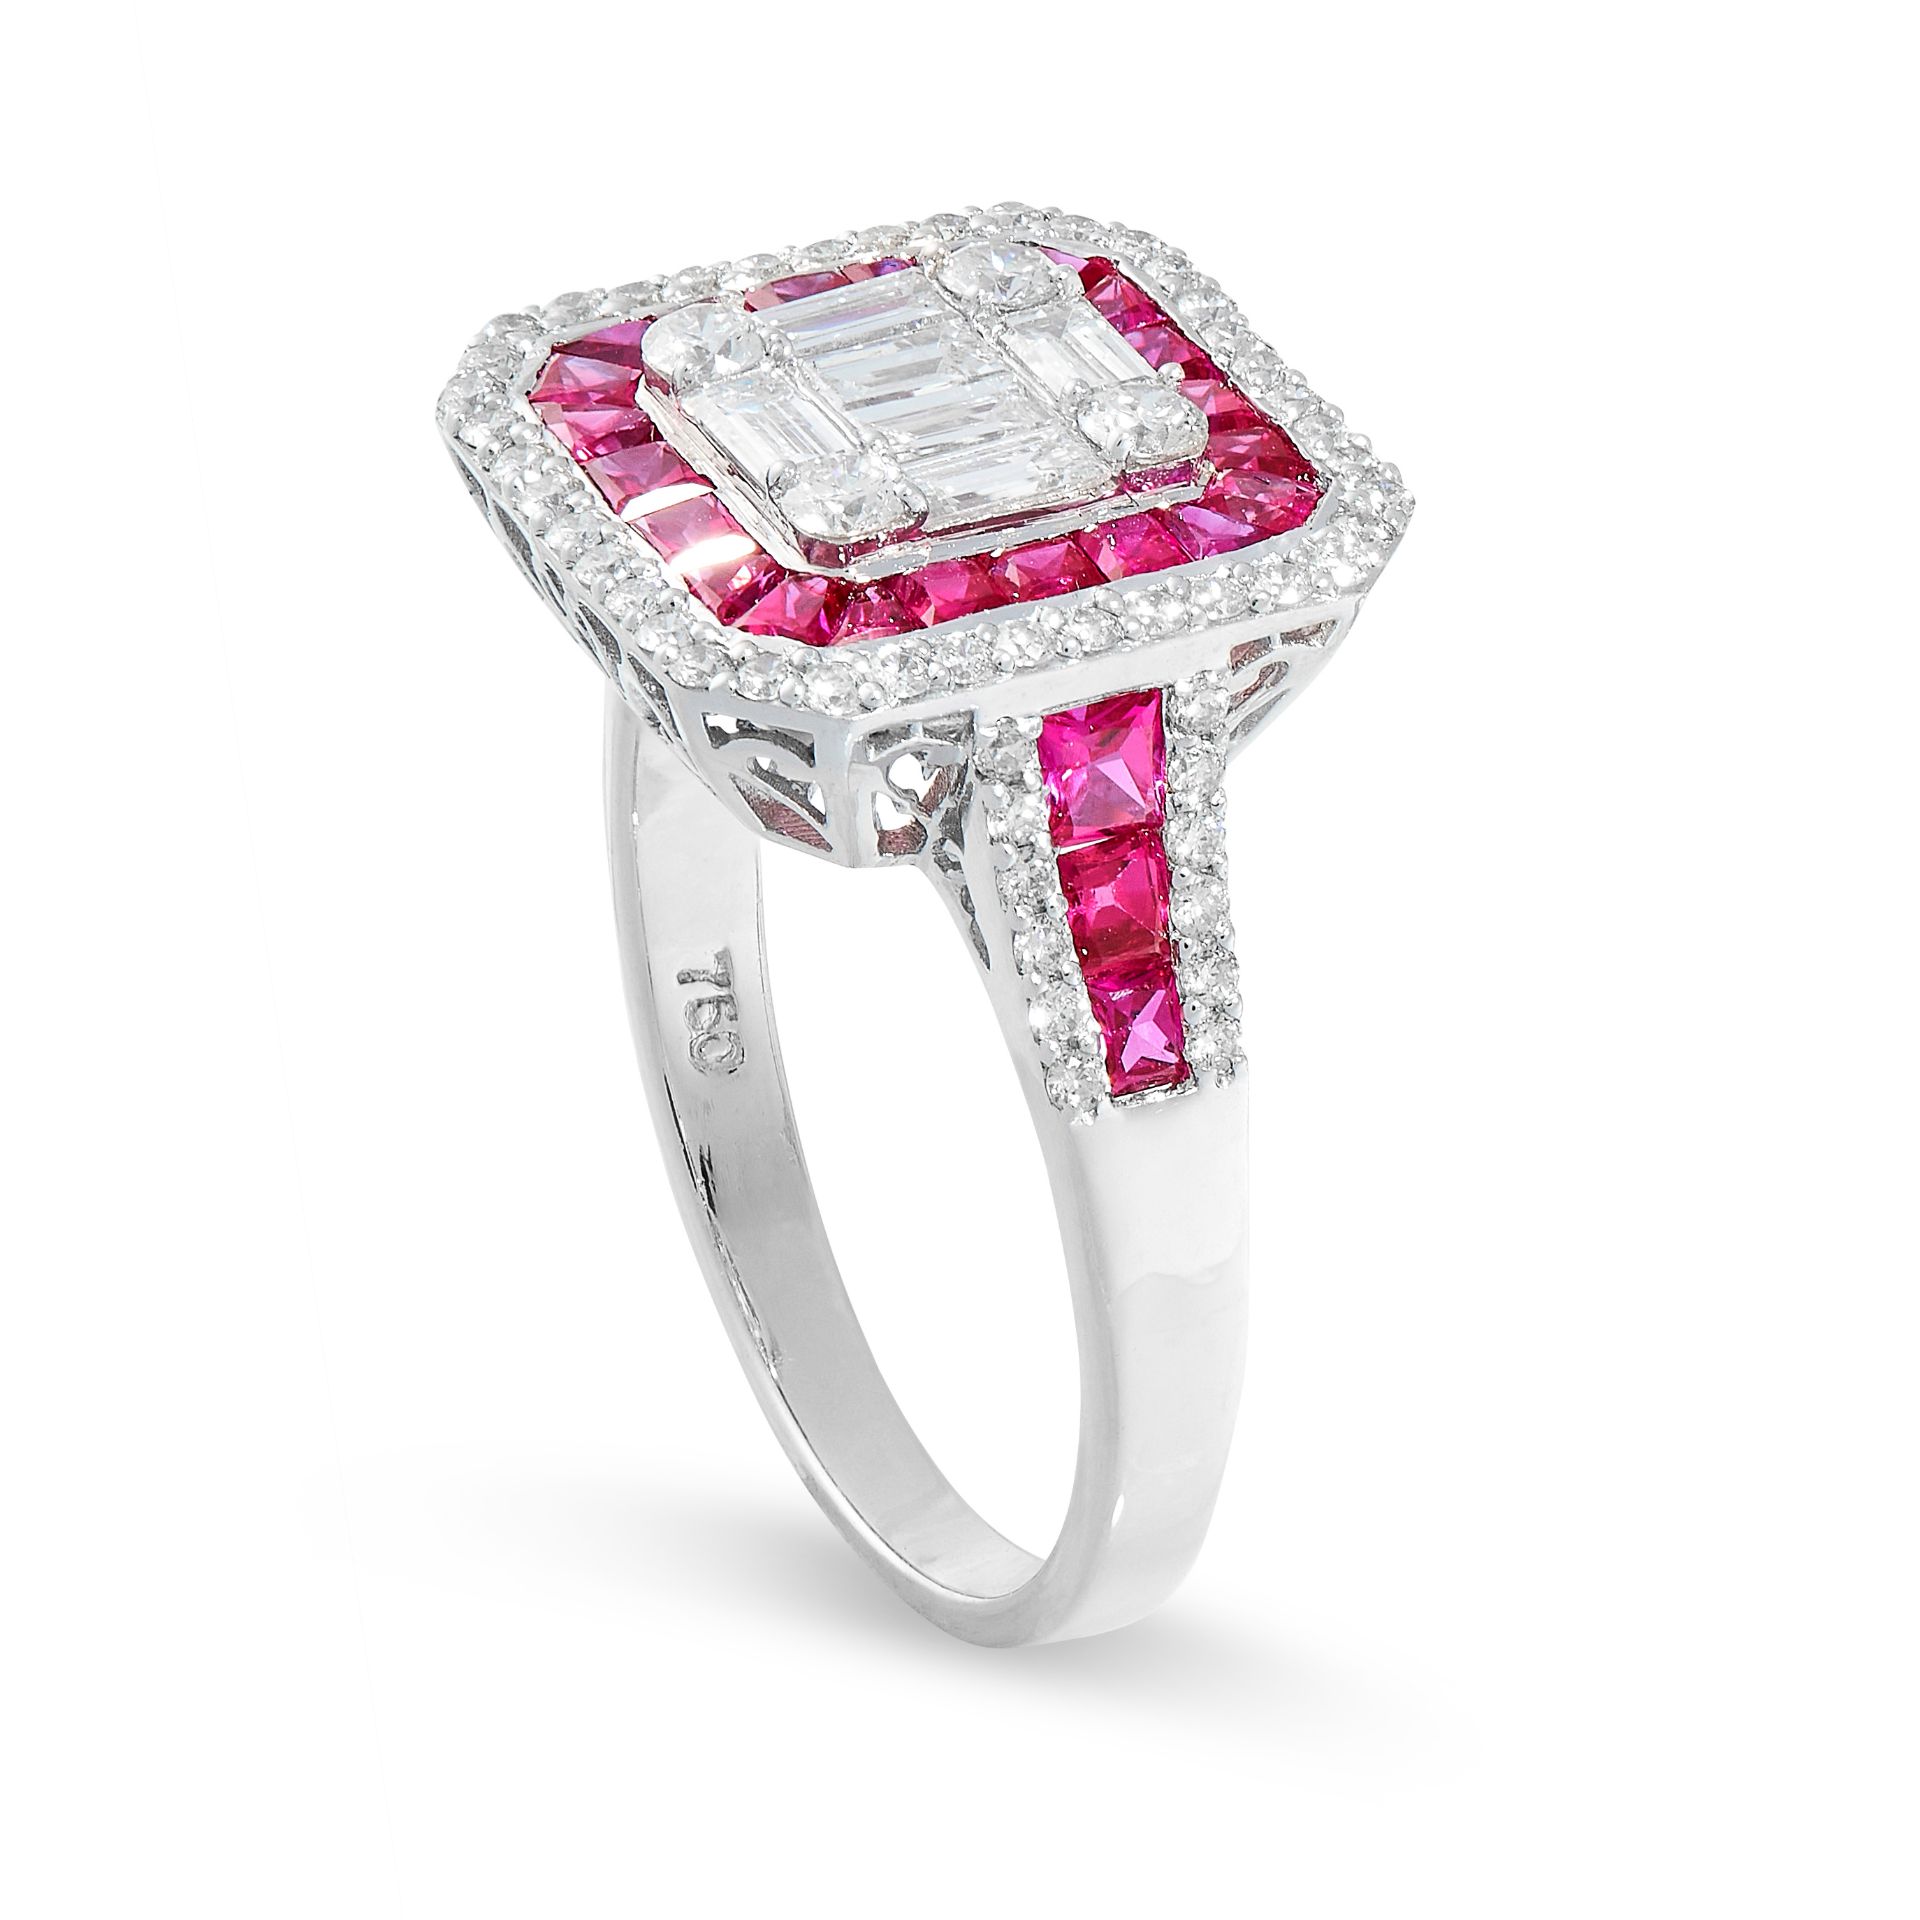 RUBY AND DIAMOND RING the central cluster composed of baguette and brilliant-cut diamonds, within - Image 2 of 2